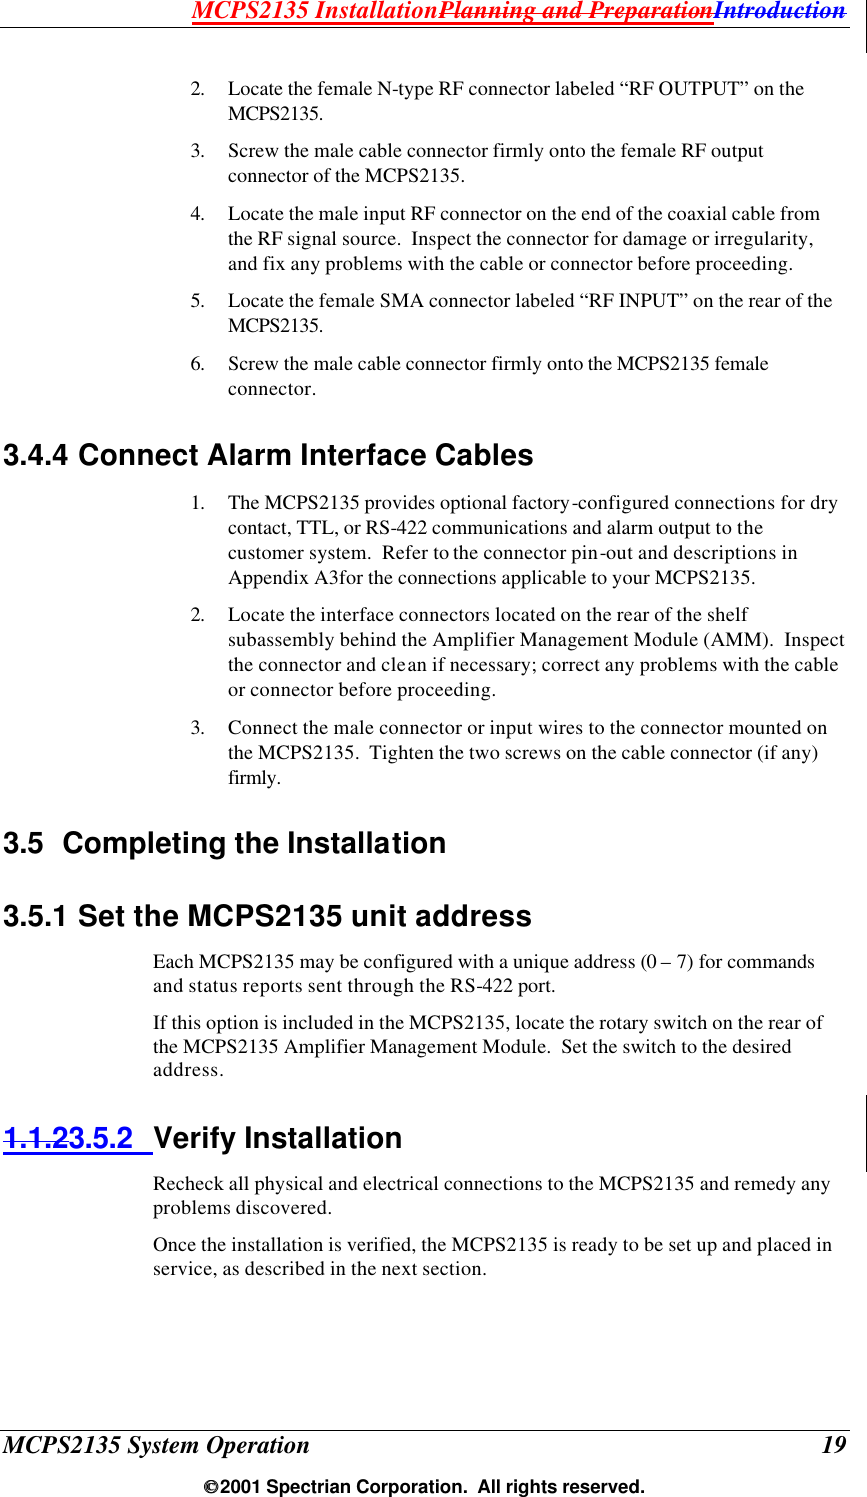 MCPS2135 InstallationPlanning and PreparationIntroduction MCPS2135 System Operation  19  2001 Spectrian Corporation.  All rights reserved. 2. Locate the female N-type RF connector labeled “RF OUTPUT” on the MCPS2135. 3. Screw the male cable connector firmly onto the female RF output connector of the MCPS2135. 4. Locate the male input RF connector on the end of the coaxial cable from the RF signal source.  Inspect the connector for damage or irregularity, and fix any problems with the cable or connector before proceeding. 5. Locate the female SMA connector labeled “RF INPUT” on the rear of the  MCPS2135. 6. Screw the male cable connector firmly onto the MCPS2135 female connector. 3.4.4 Connect Alarm Interface Cables 1. The MCPS2135 provides optional factory-configured connections for dry contact, TTL, or RS-422 communications and alarm output to the customer system.  Refer to the connector pin-out and descriptions in  Appendix A3for the connections applicable to your MCPS2135. 2. Locate the interface connectors located on the rear of the shelf subassembly behind the Amplifier Management Module (AMM).  Inspect the connector and clean if necessary; correct any problems with the cable or connector before proceeding. 3. Connect the male connector or input wires to the connector mounted on the MCPS2135.  Tighten the two screws on the cable connector (if any) firmly. 3.5 Completing the Installation 3.5.1 Set the MCPS2135 unit address Each MCPS2135 may be configured with a unique address (0 – 7) for commands and status reports sent through the RS-422 port. If this option is included in the MCPS2135, locate the rotary switch on the rear of the MCPS2135 Amplifier Management Module.  Set the switch to the desired address. 1.1.23.5.2 Verify Installation Recheck all physical and electrical connections to the MCPS2135 and remedy any problems discovered. Once the installation is verified, the MCPS2135 is ready to be set up and placed in service, as described in the next section.  